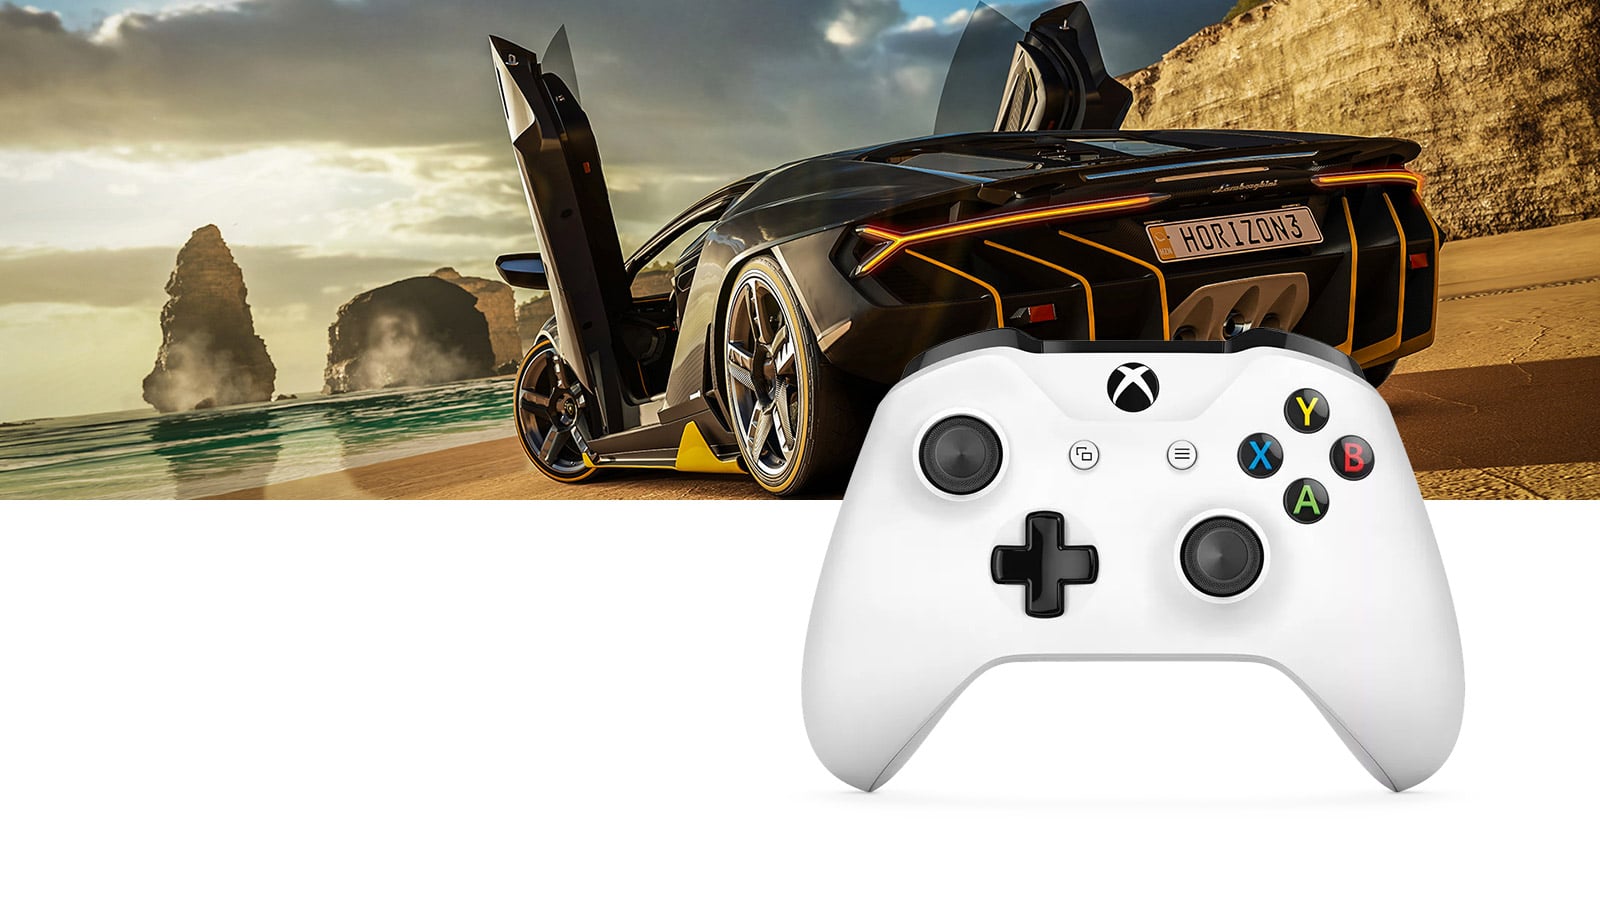 Xbox One S controller, as seen from the front with a gameplay image from Forza Horizon 3 behind it